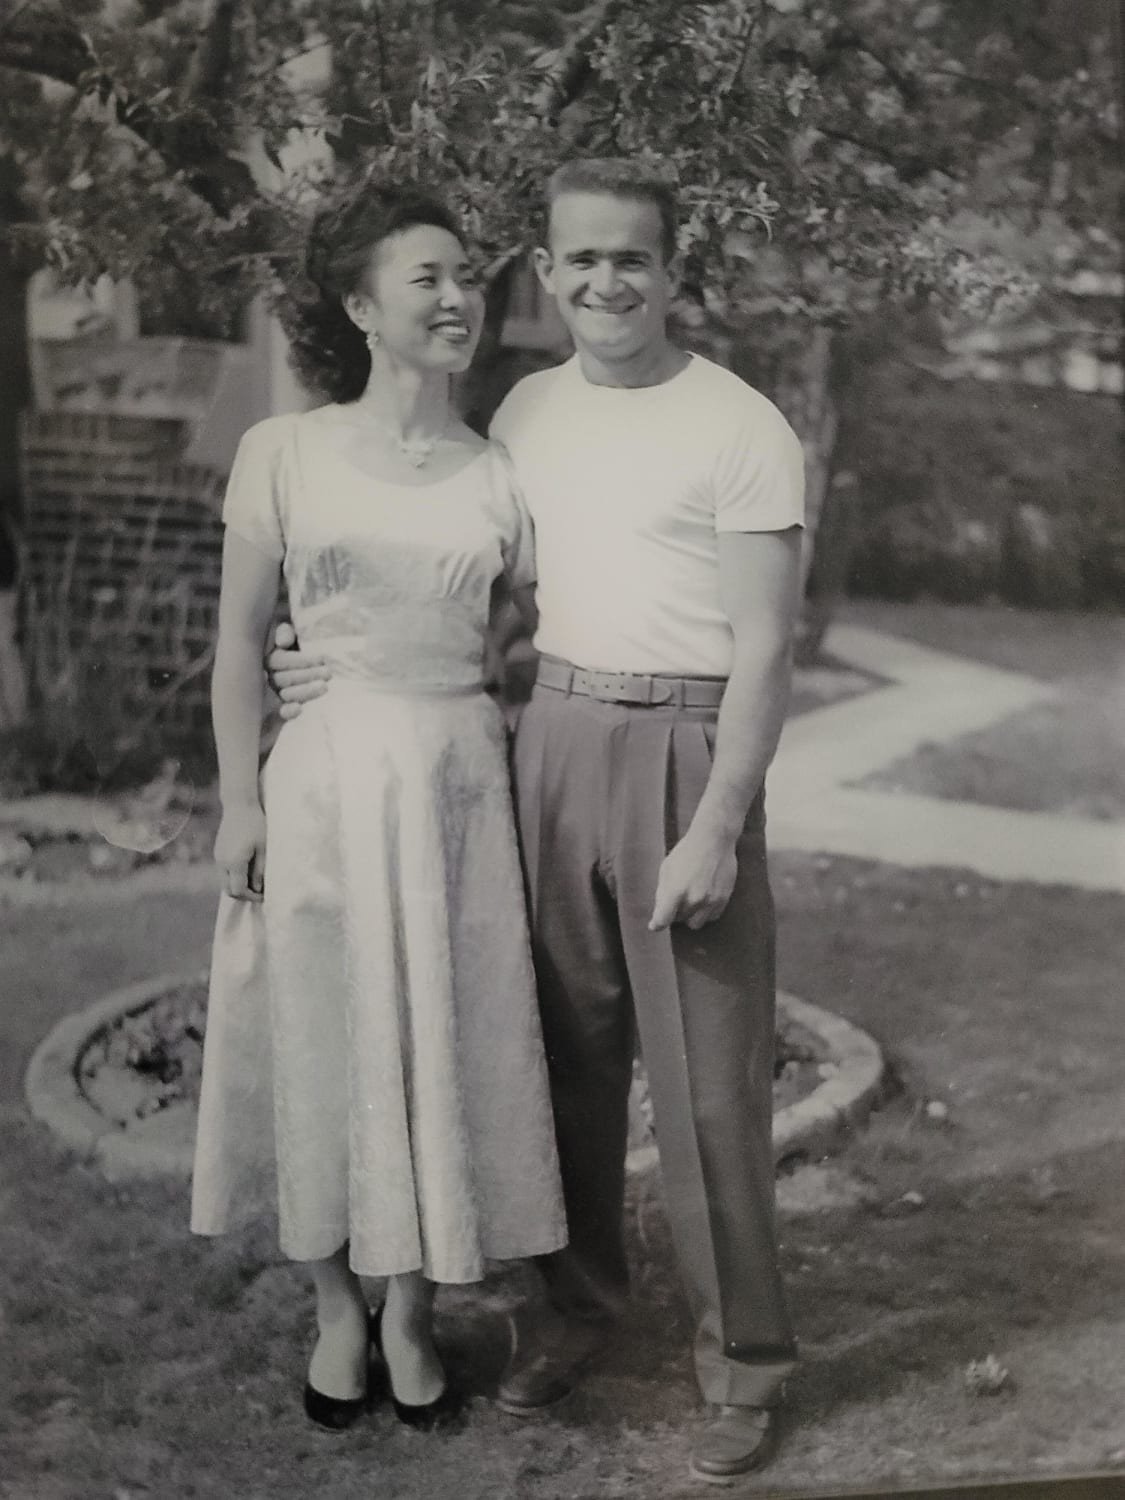 Grandparents circa mid to late 1950's. Met in the Korean War. Grandma was a Japanese/English translator. Grandpa is Italian/American and was a soldier in the Army. Married 62 years